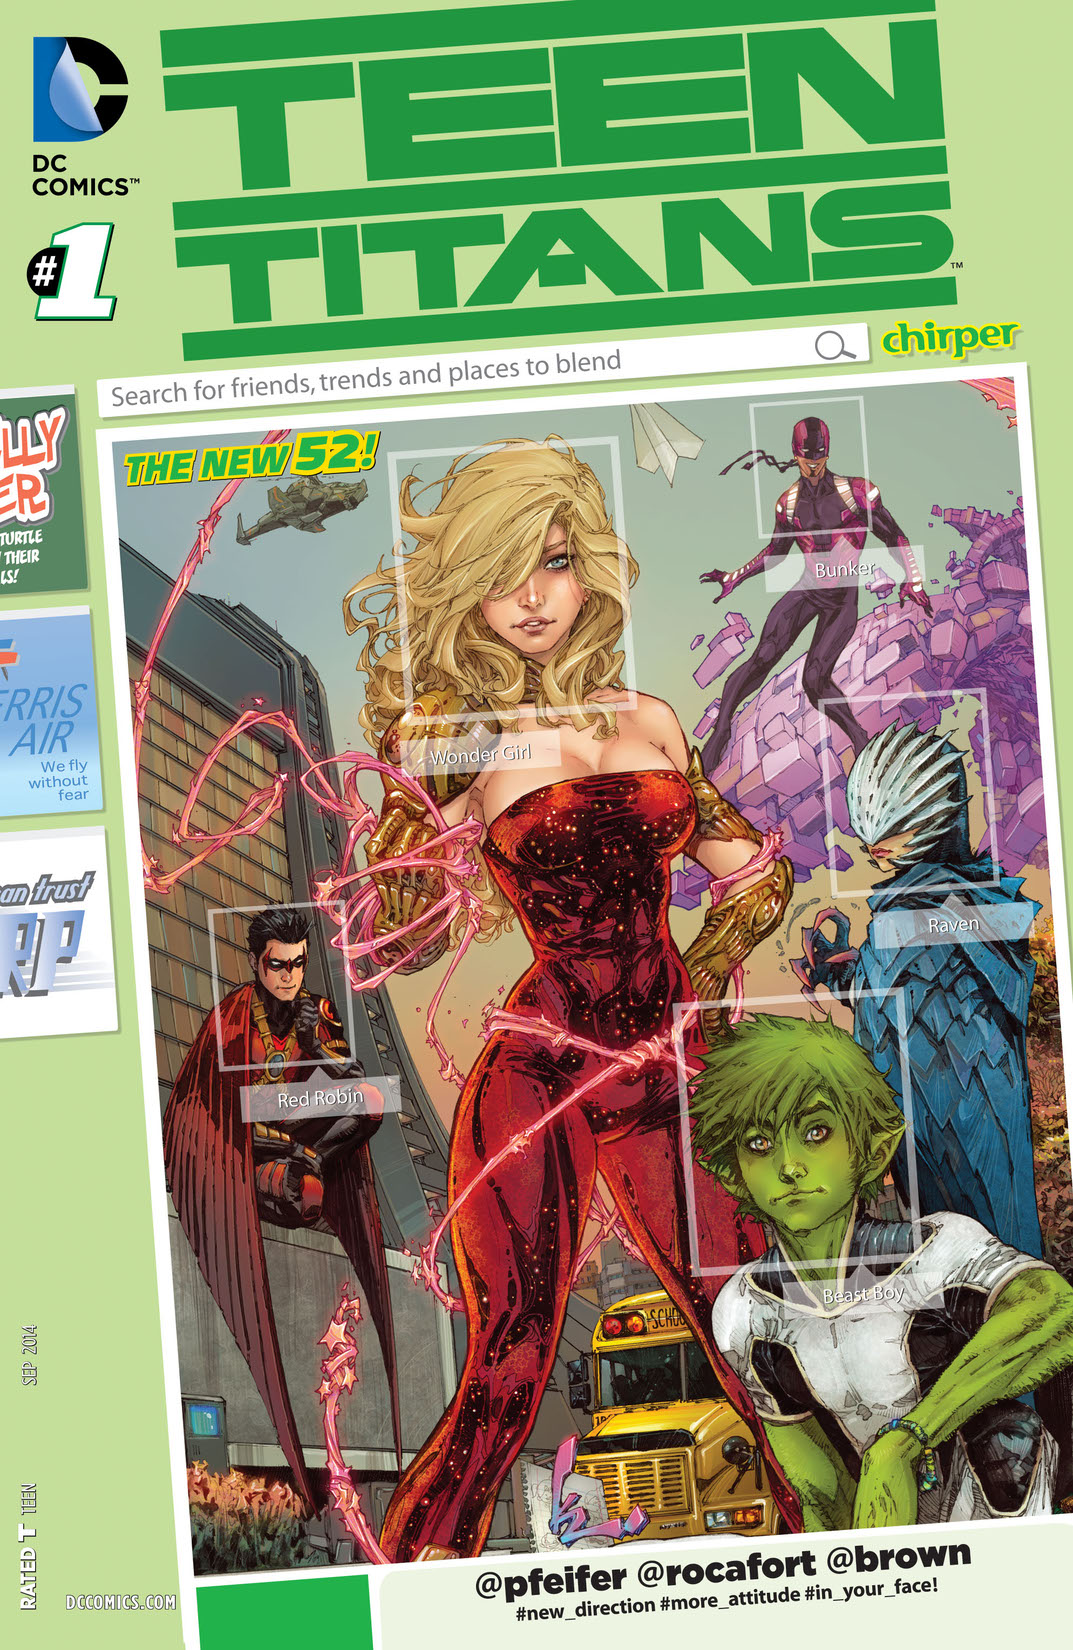 Teen Titans (2014-) #1 preview images